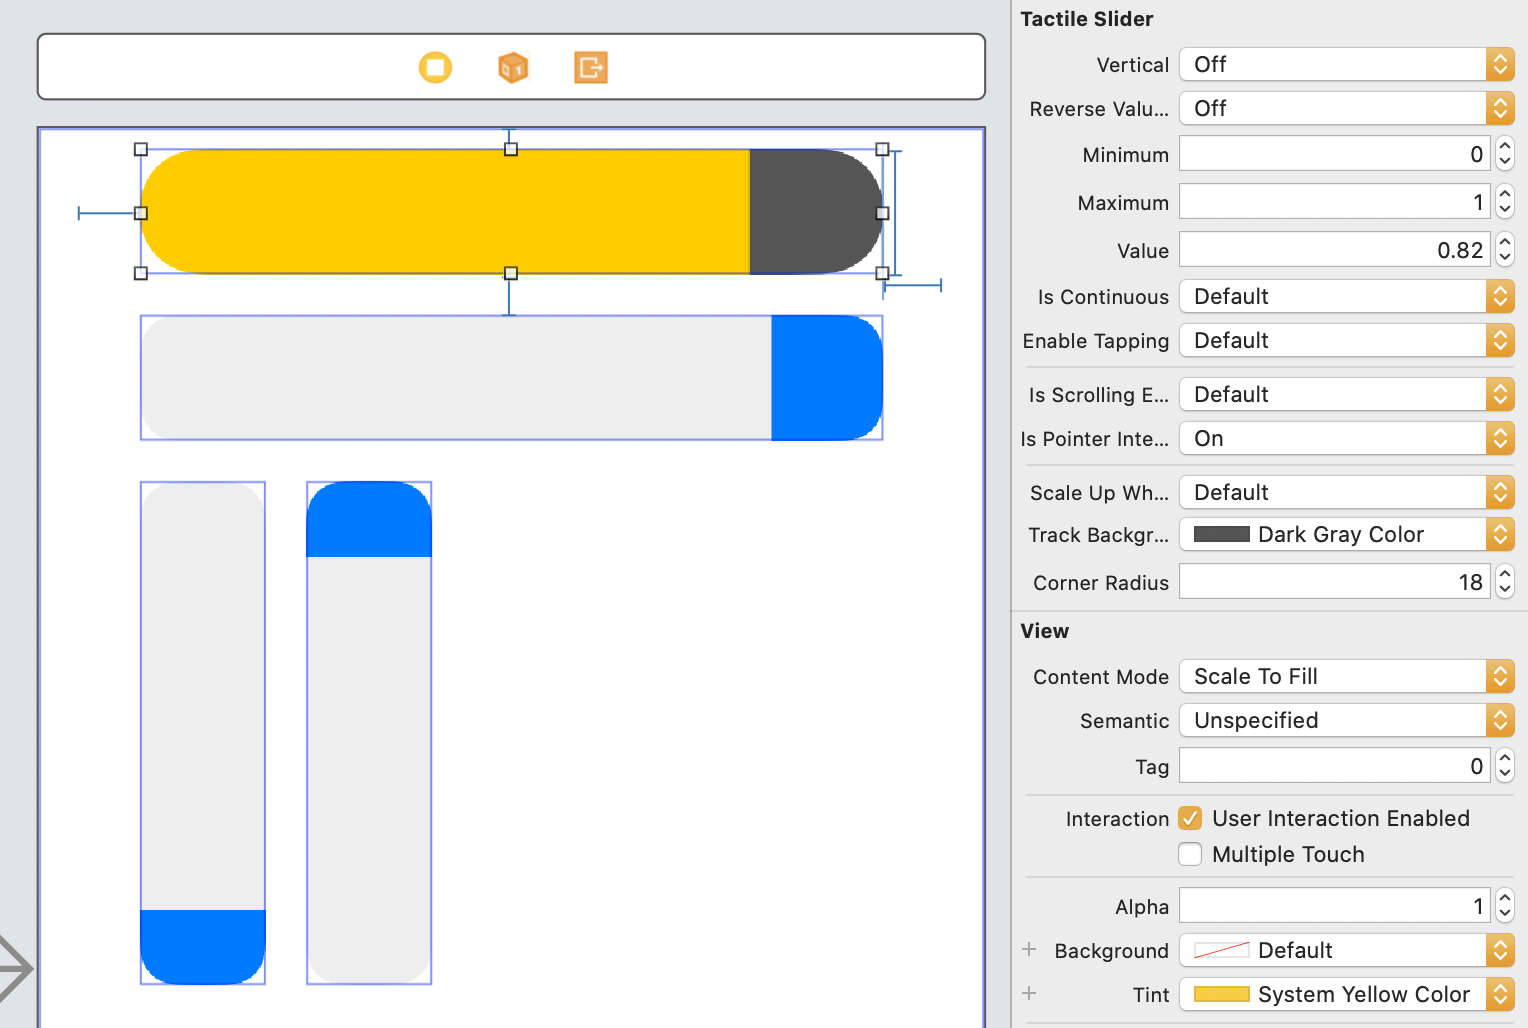 screenshot of Xcode Interface Builder demonstrating a TactileSlider being customized using the graphical interface